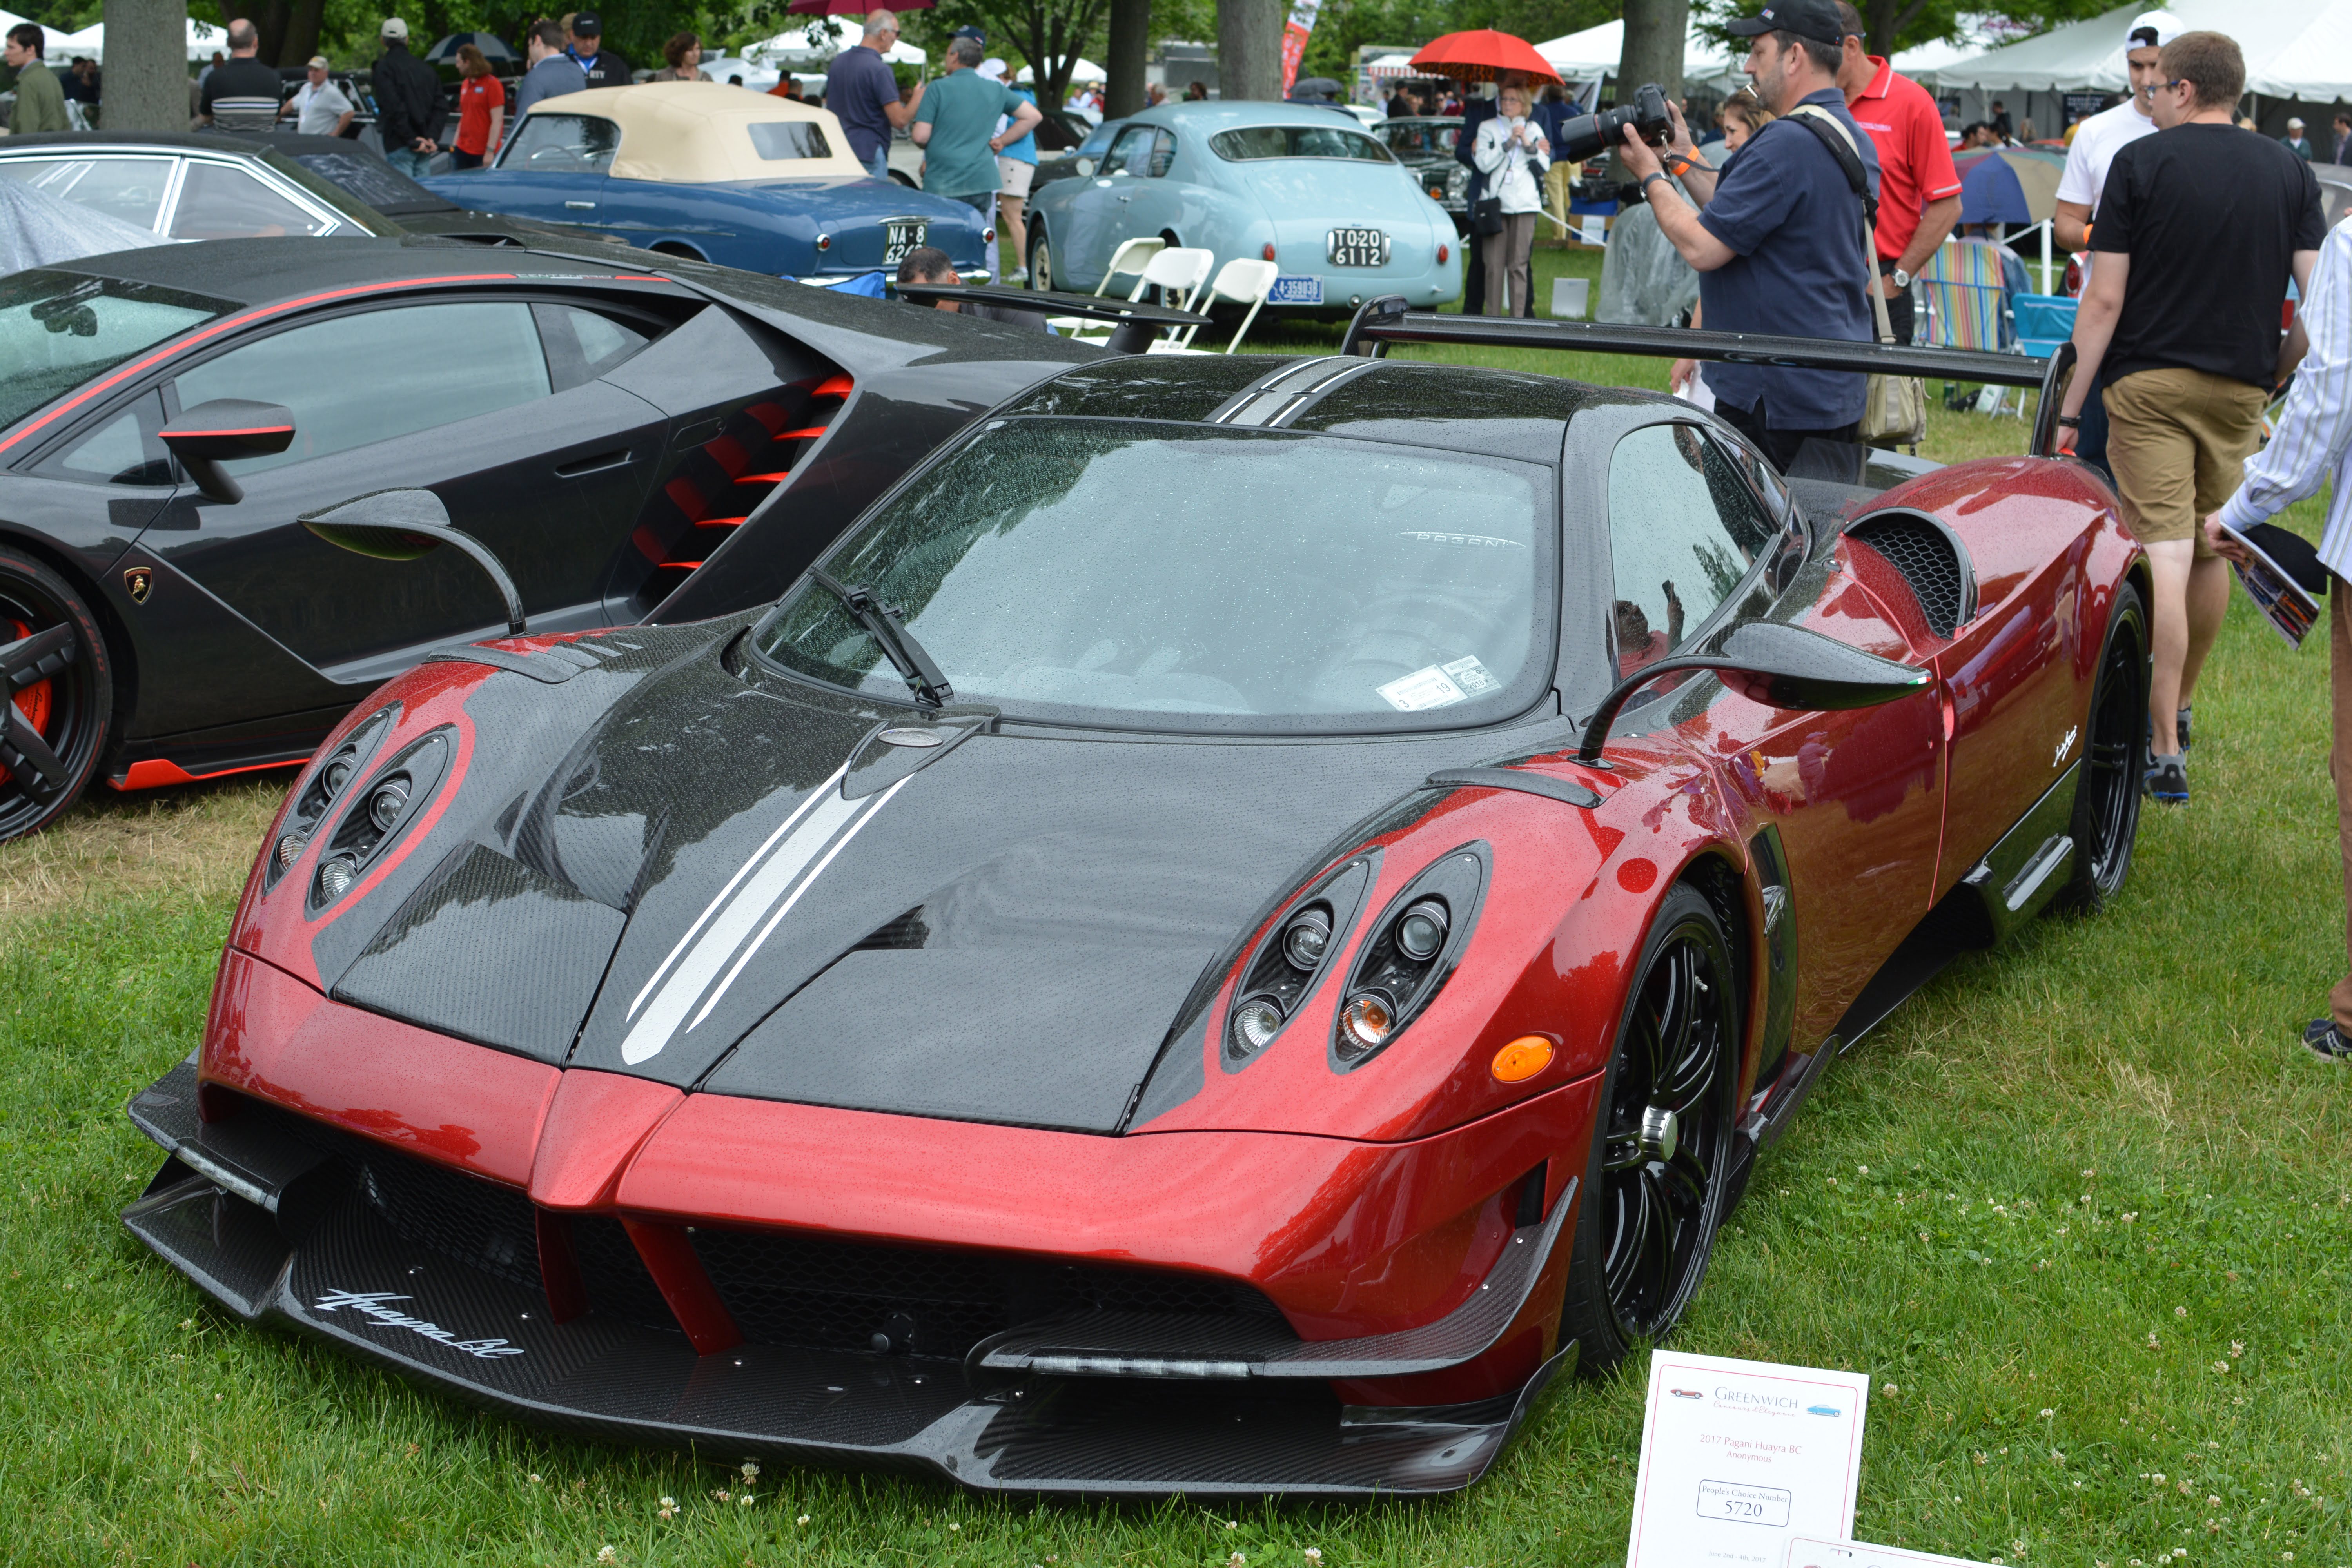 The Greenwich Concours D’elegance hosted its 22nd annual car show on June 3-4, 2017 in Roger Sherman Baldwin Park. Photo Brendan Boyd